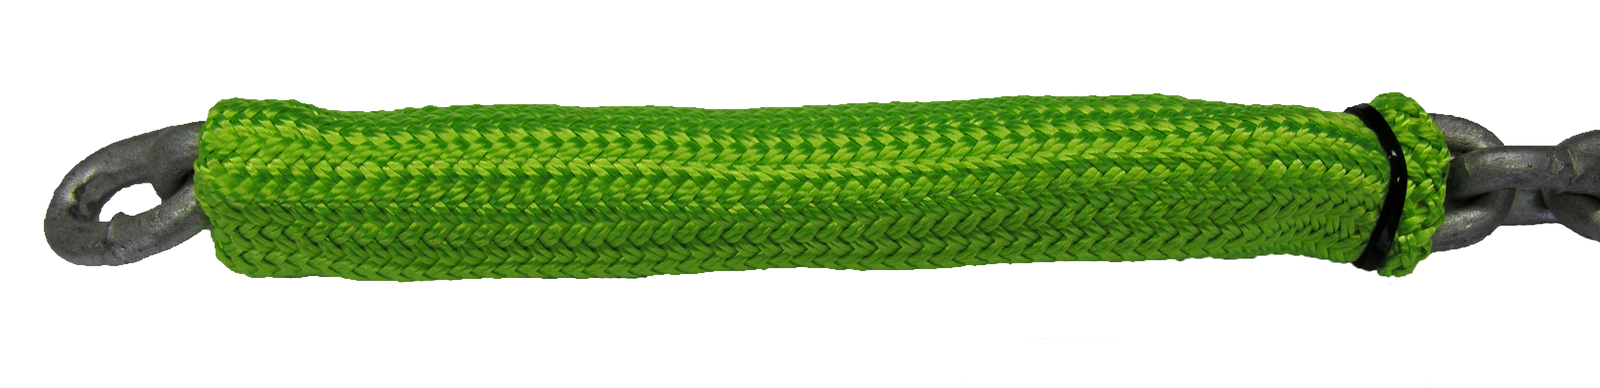 Chain Sock Fluro Green Designed To Protect Vessels Winch And Dampen Chain Noise Suits 10m x 6mm Short Link